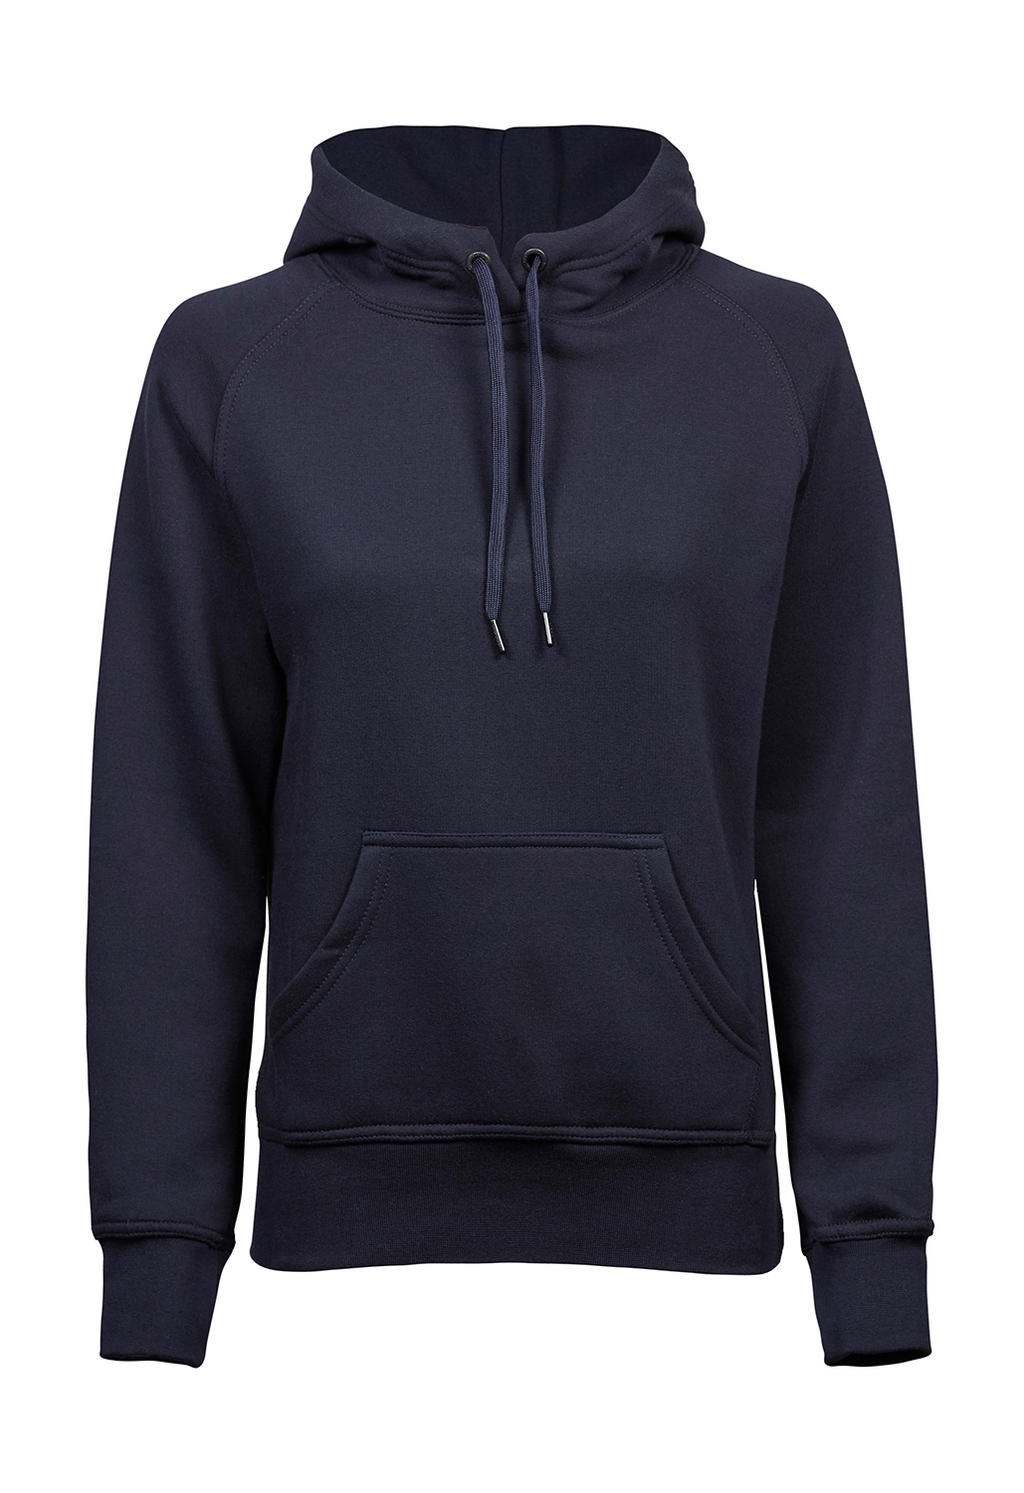  Ladies Hooded Sweat in Farbe Navy